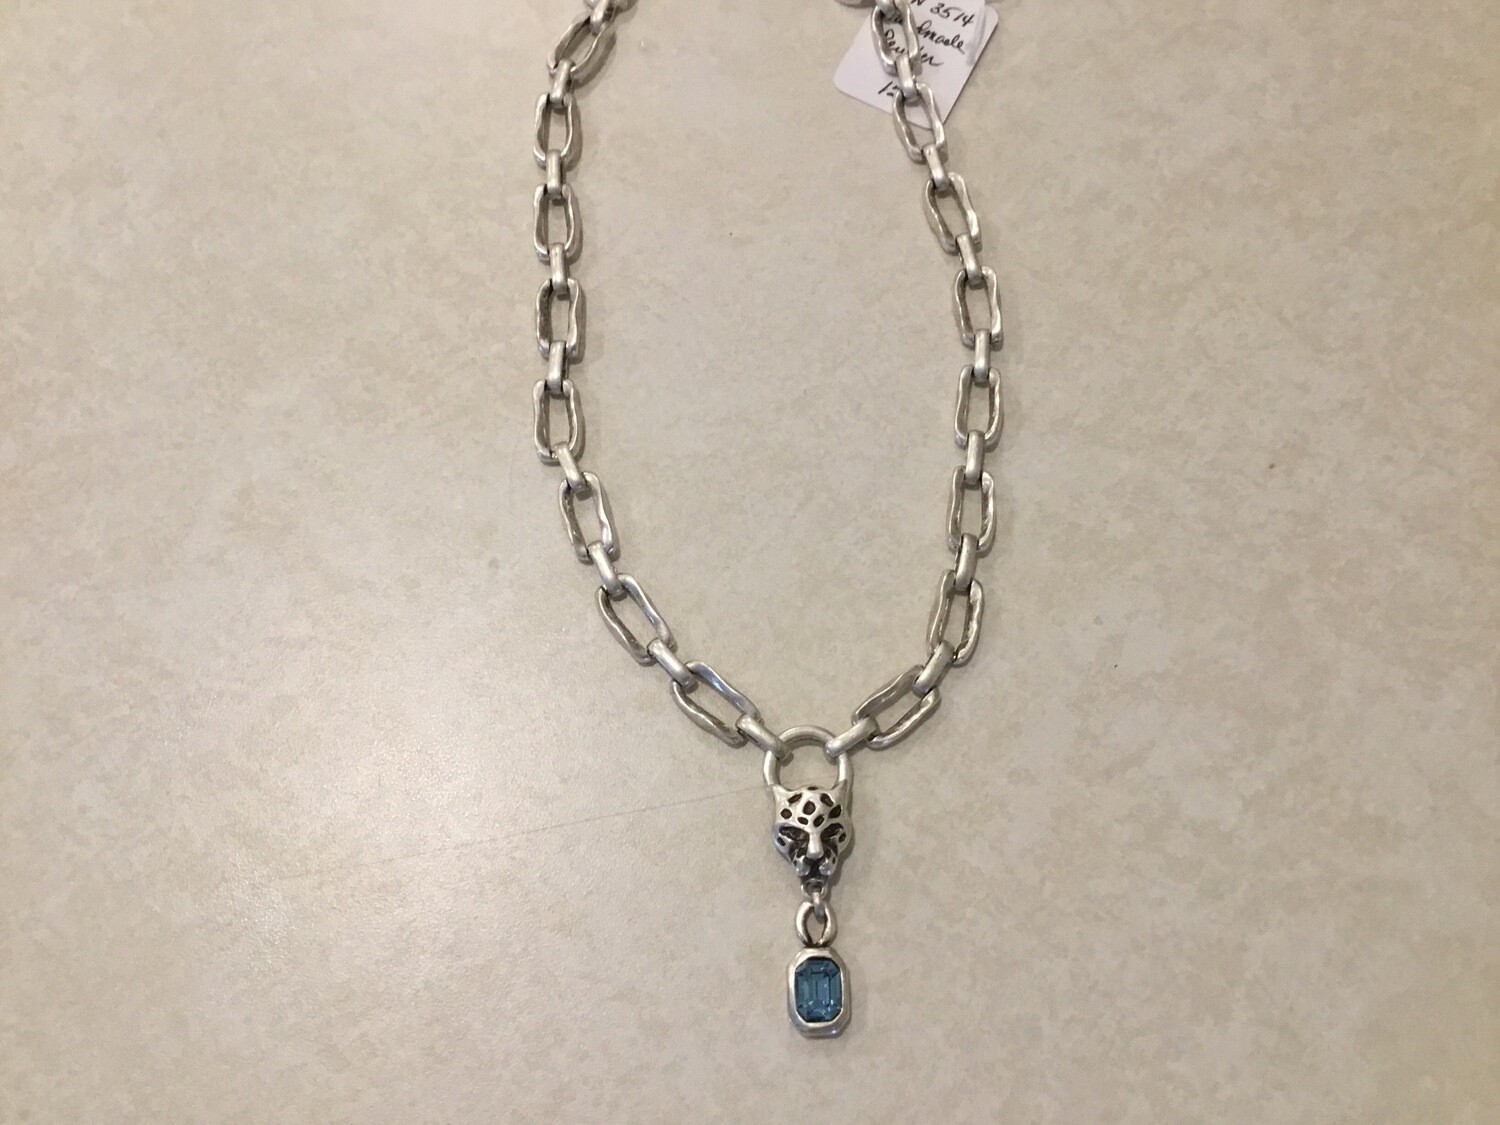 Short Handmade Pewter Necklace With Cheetah And Beautiful Blue Crystal